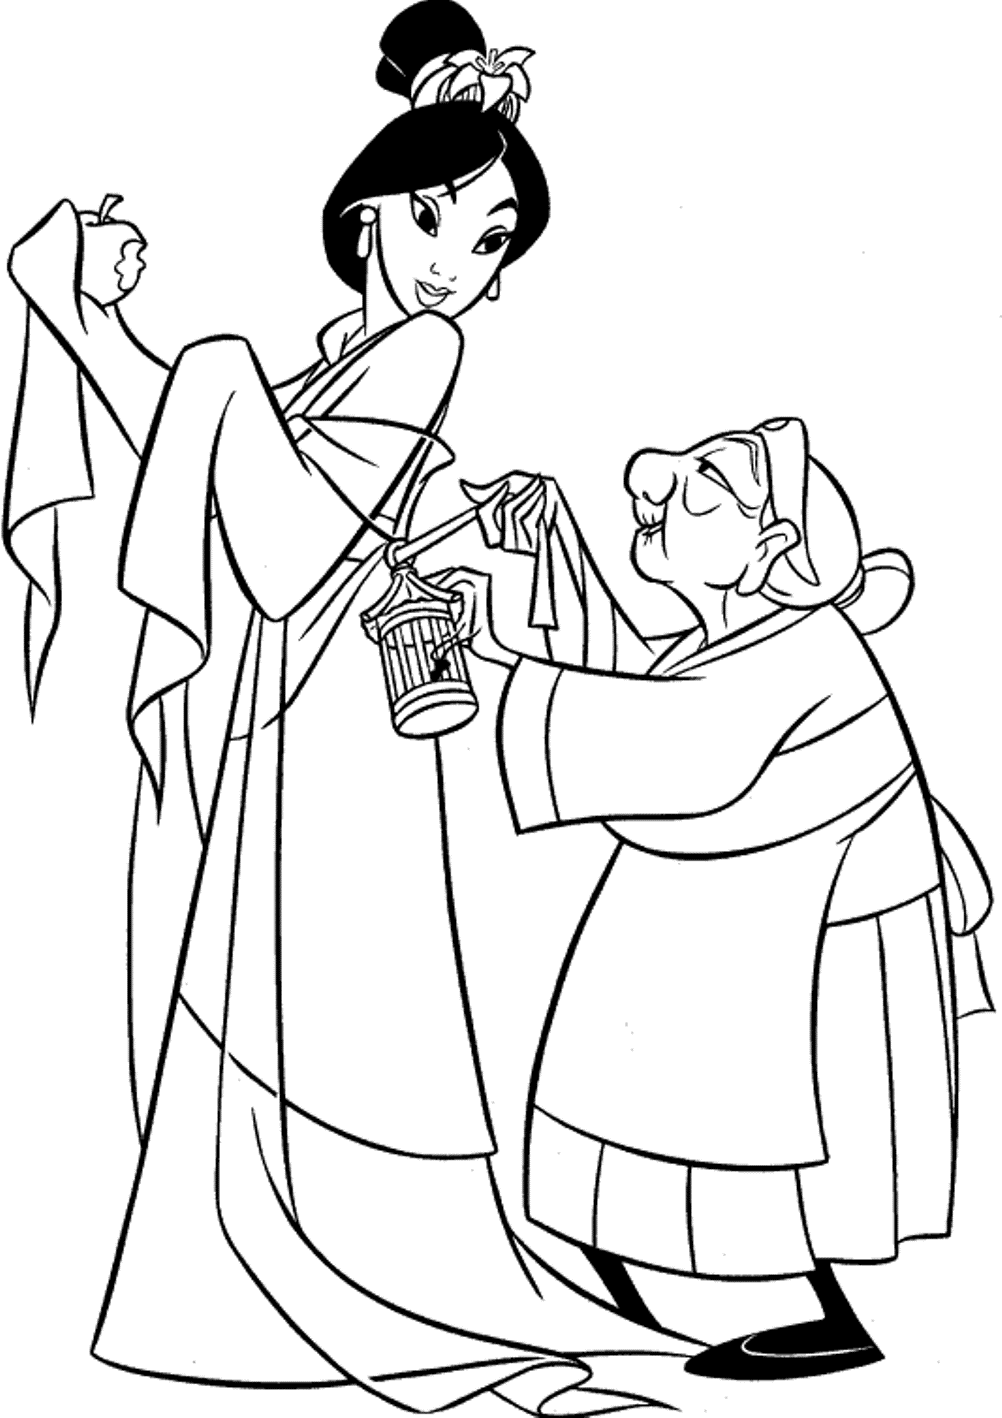 Mulan Coloring Pages Online Free   Coloring Home